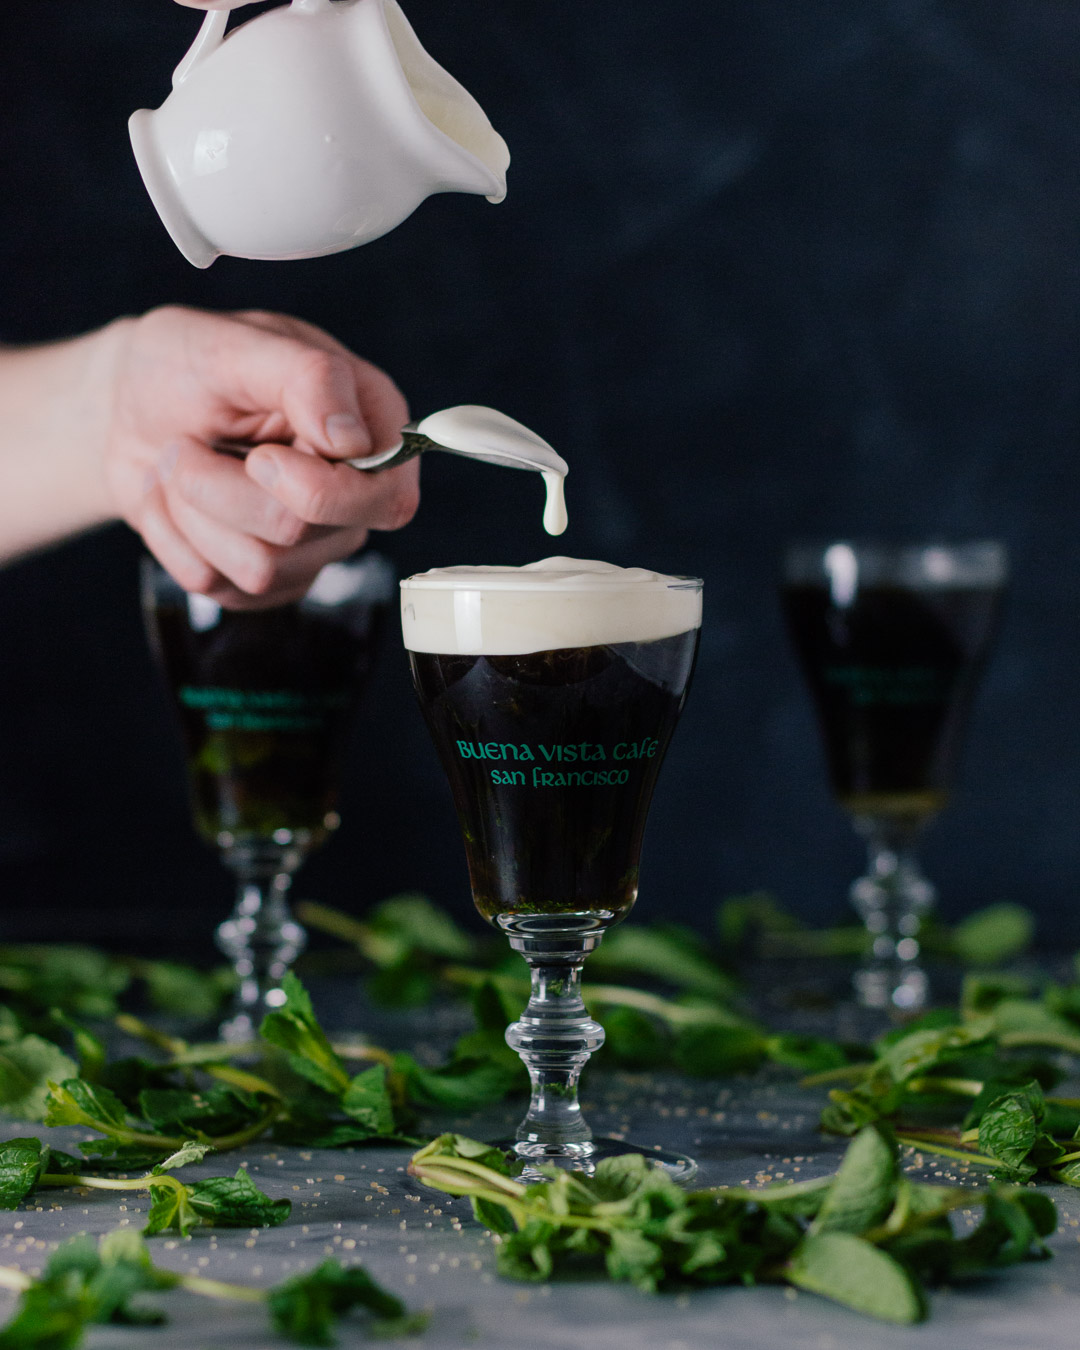 Vertical shot showing a hand pouring cream into an Irish Coffee glass.